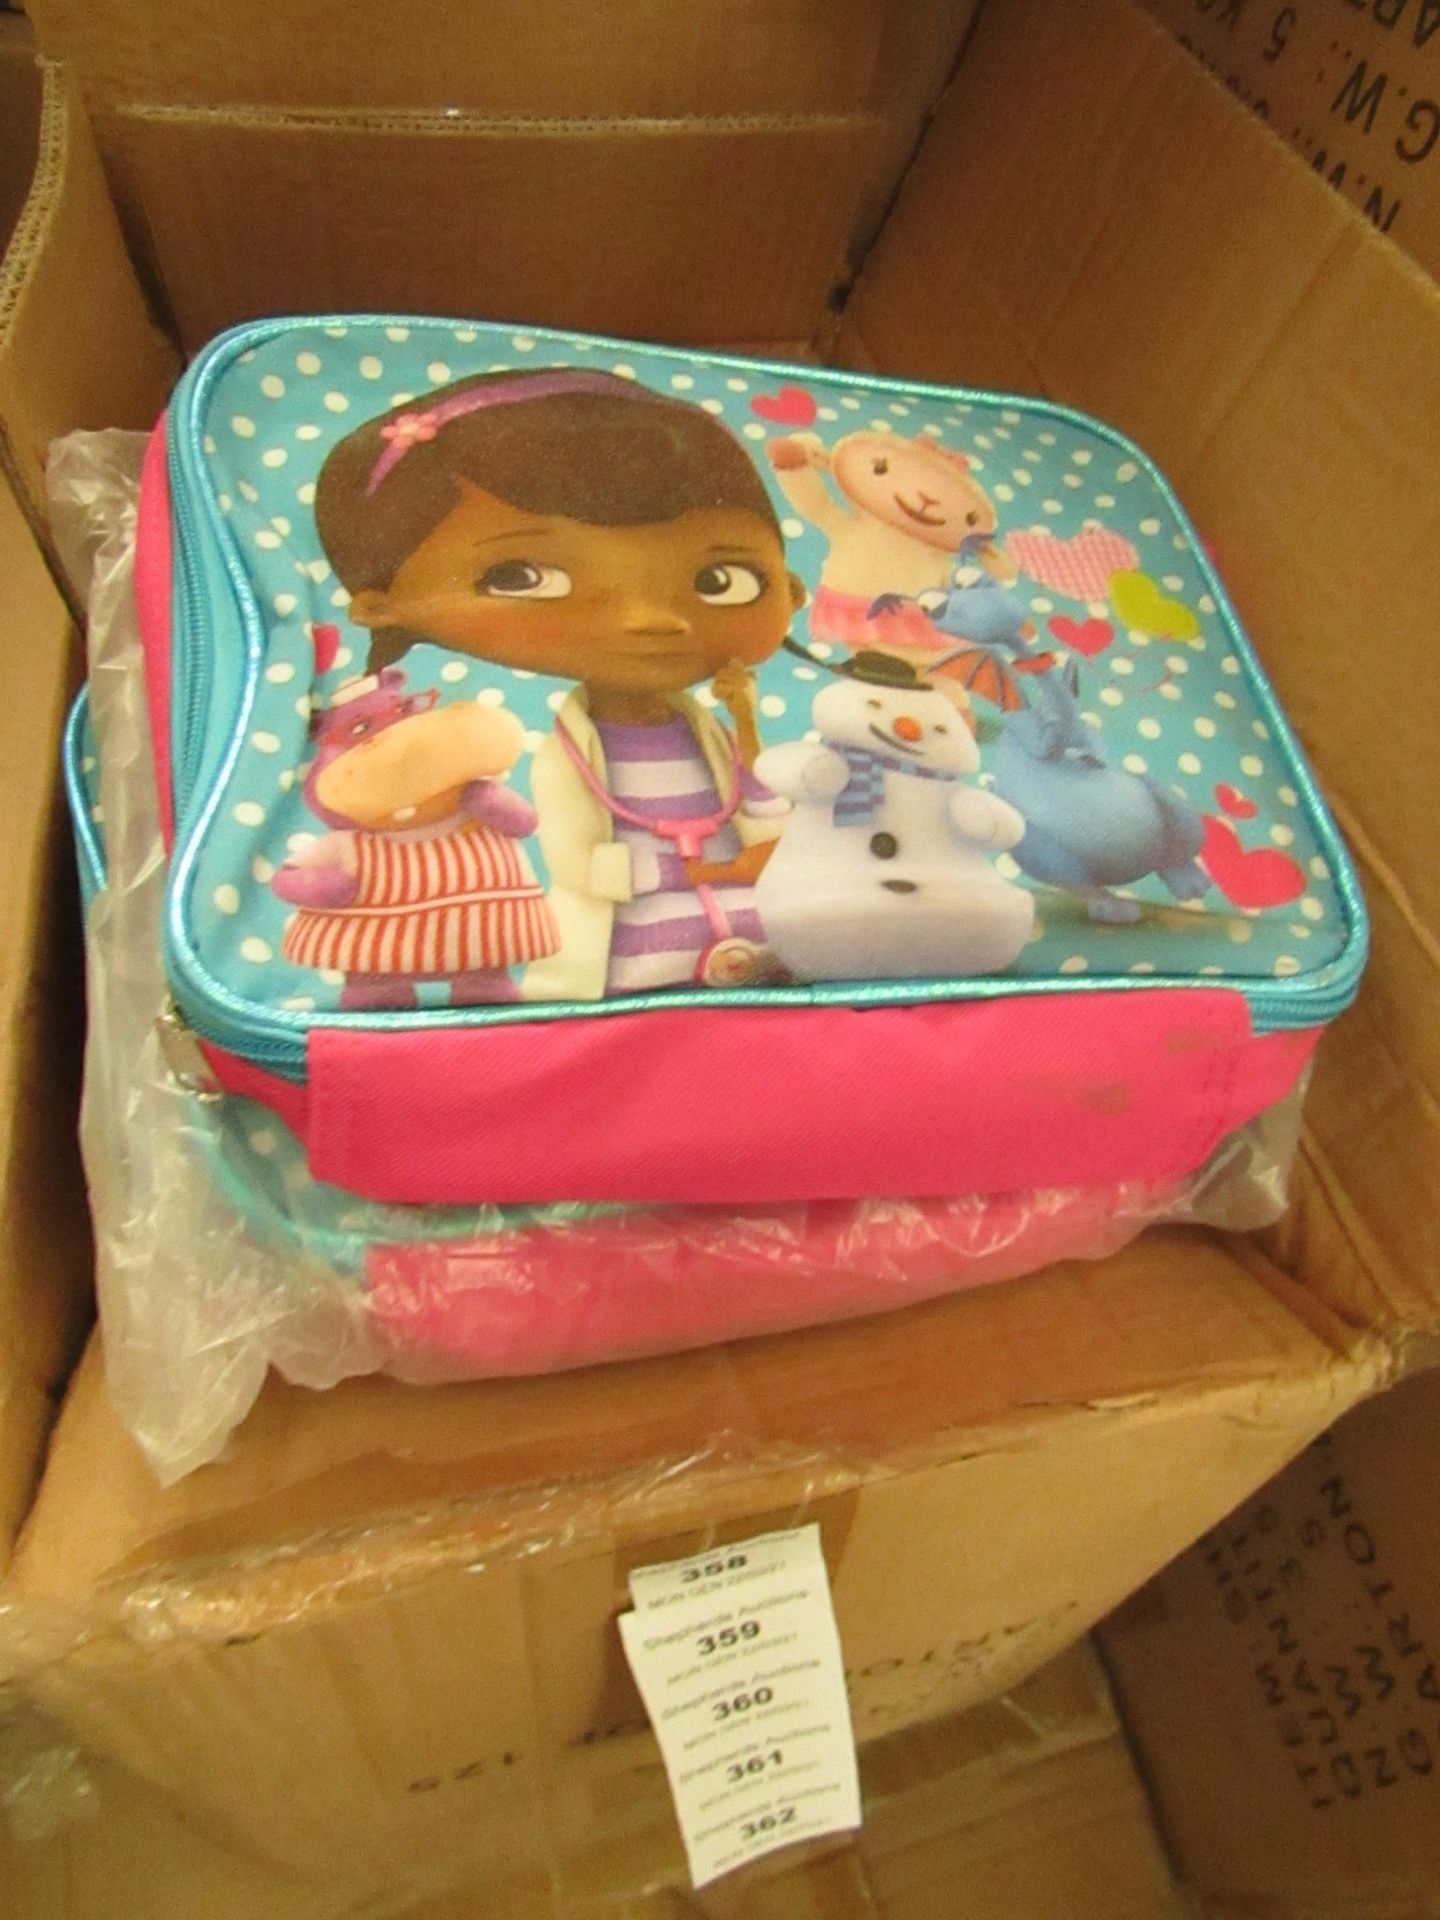 5x Disney Junior - Doc Mcstuffins Fabric Lunch Box RRP £5.49 each - New & Packaged.